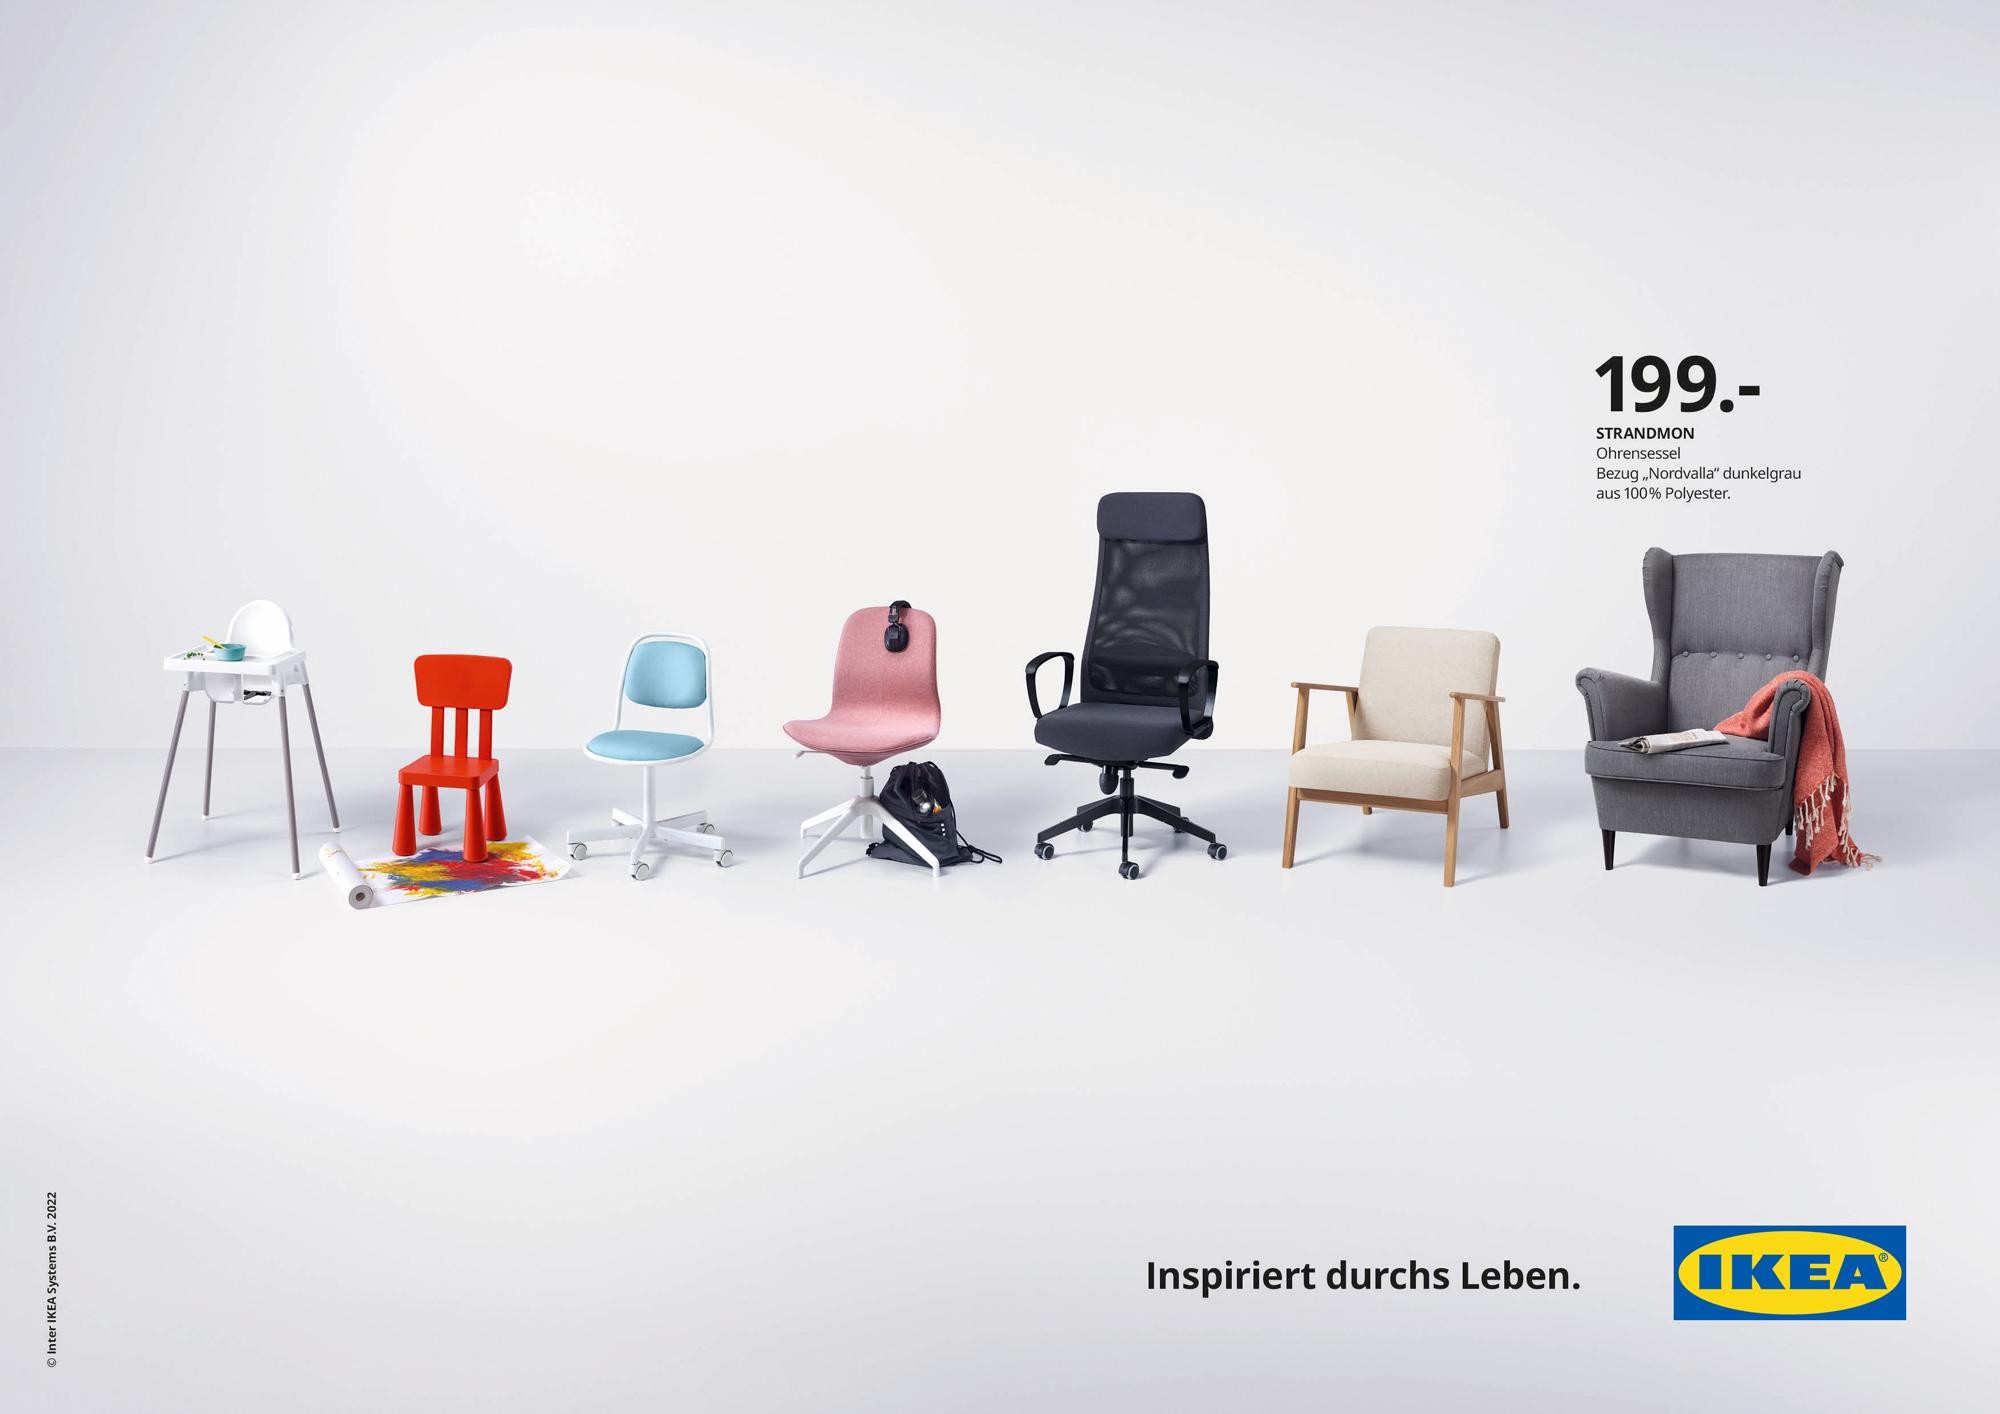 IKEA - Inspired by life